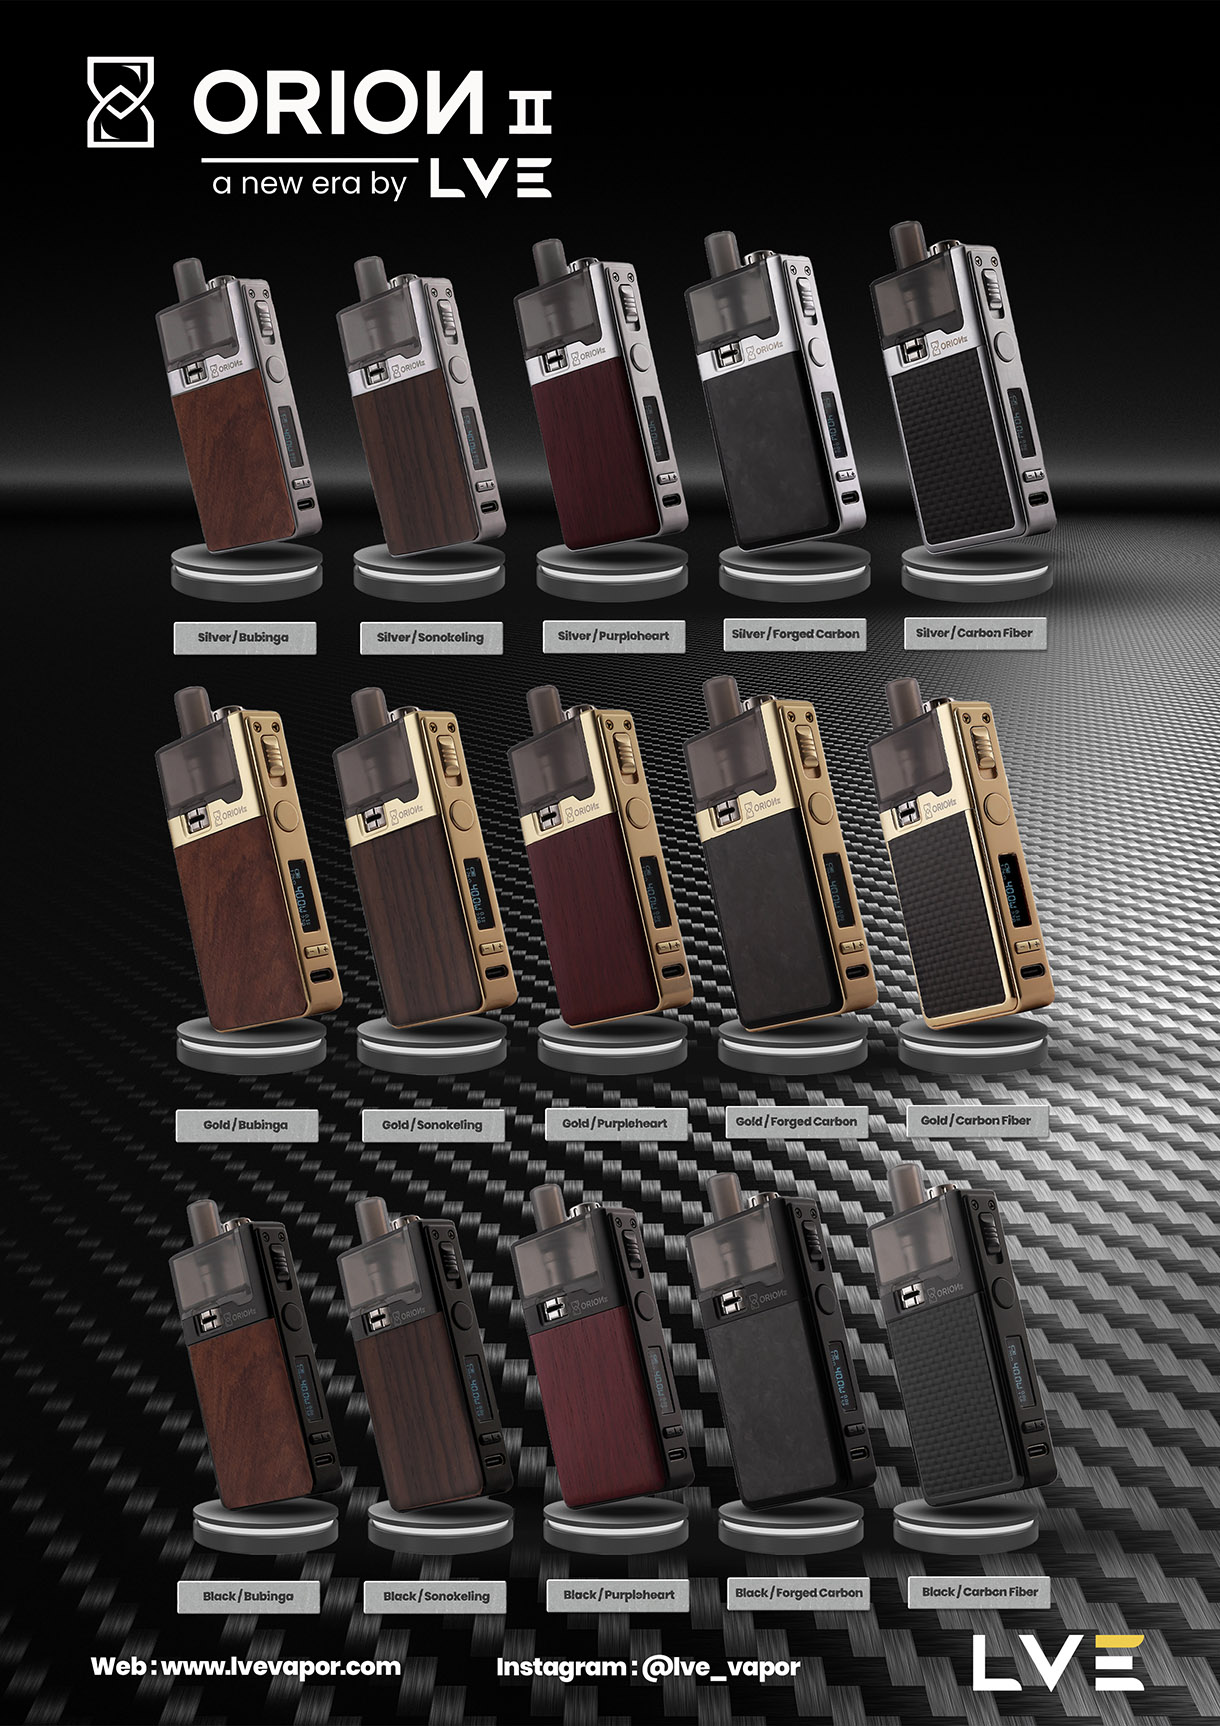 All orion ii device frame colour and panel options shown in one image